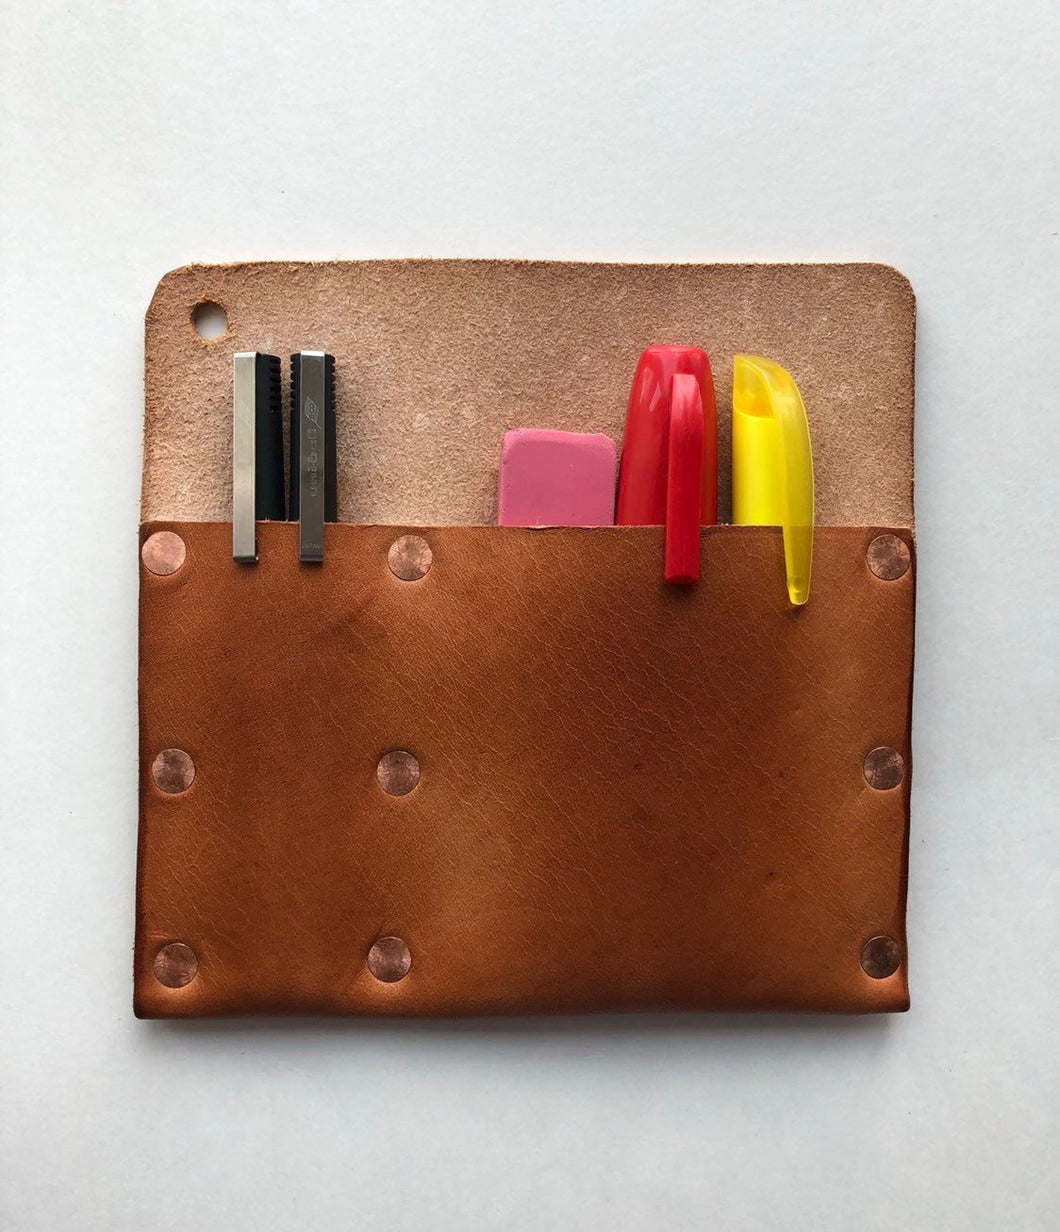 Large Leather Instrument Caddy Sleeve for Pens, Phone, Markers and other Tools